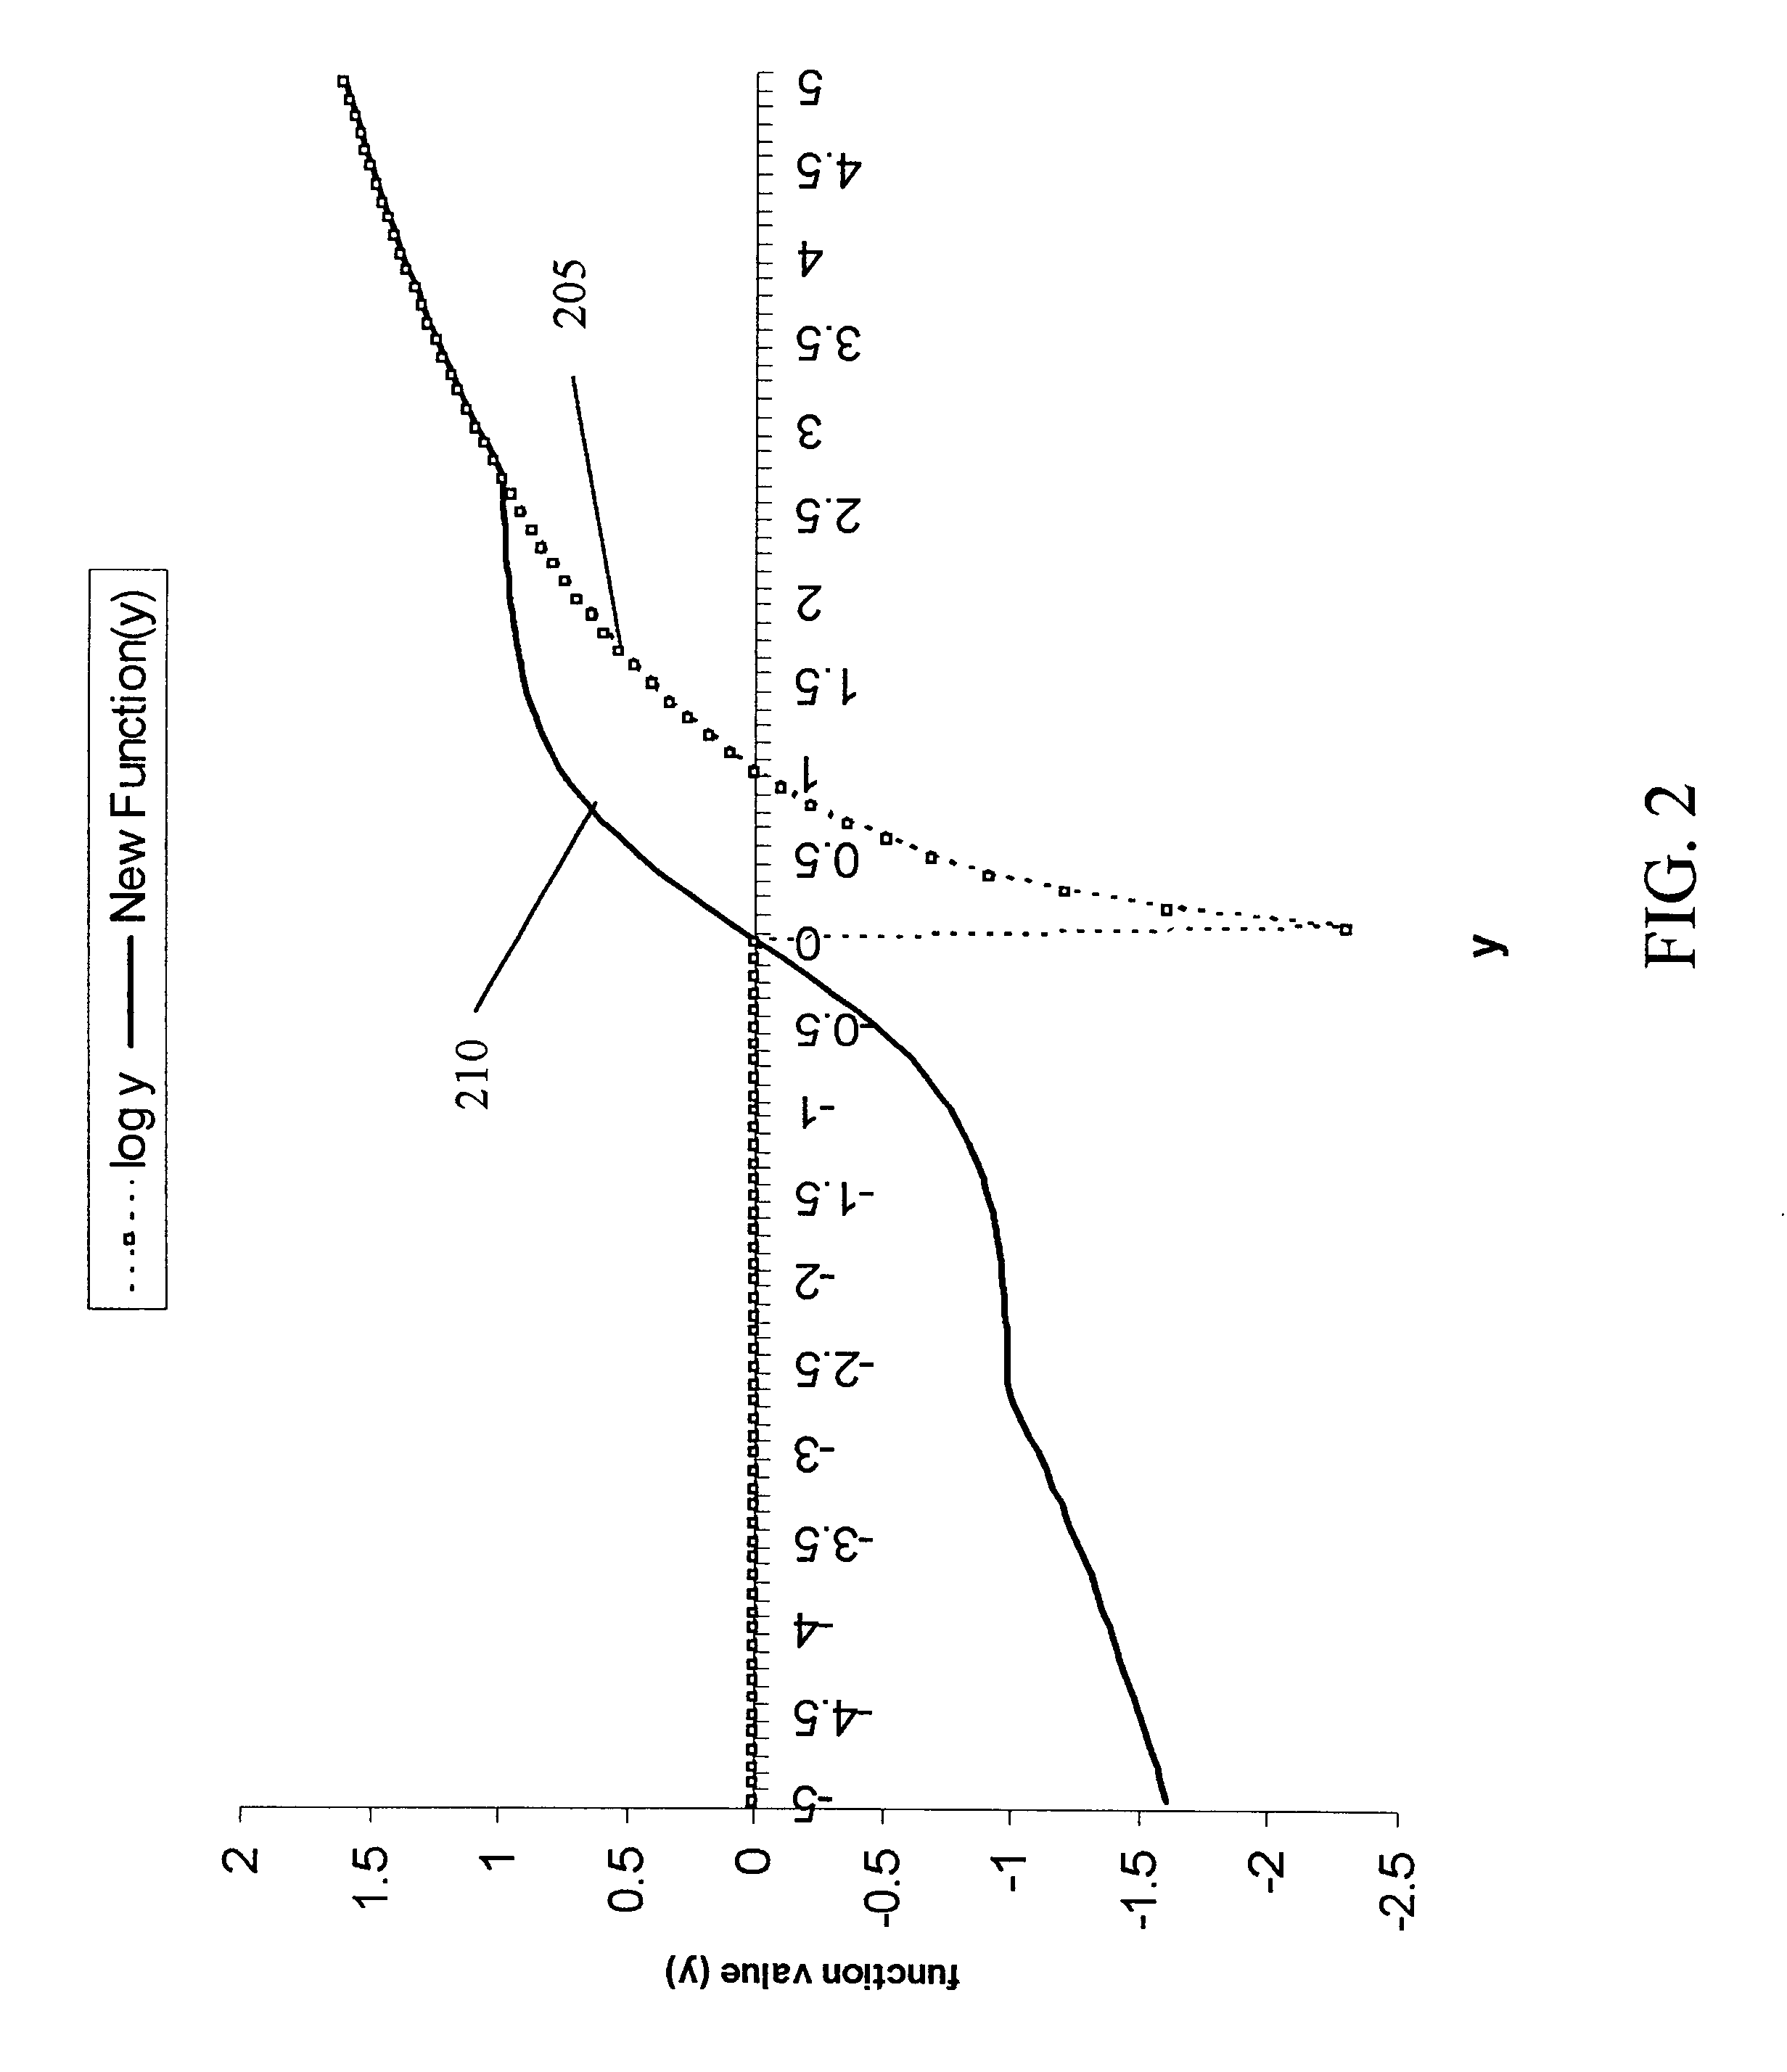 Employing a combined function for exception exploration in multidimensional data